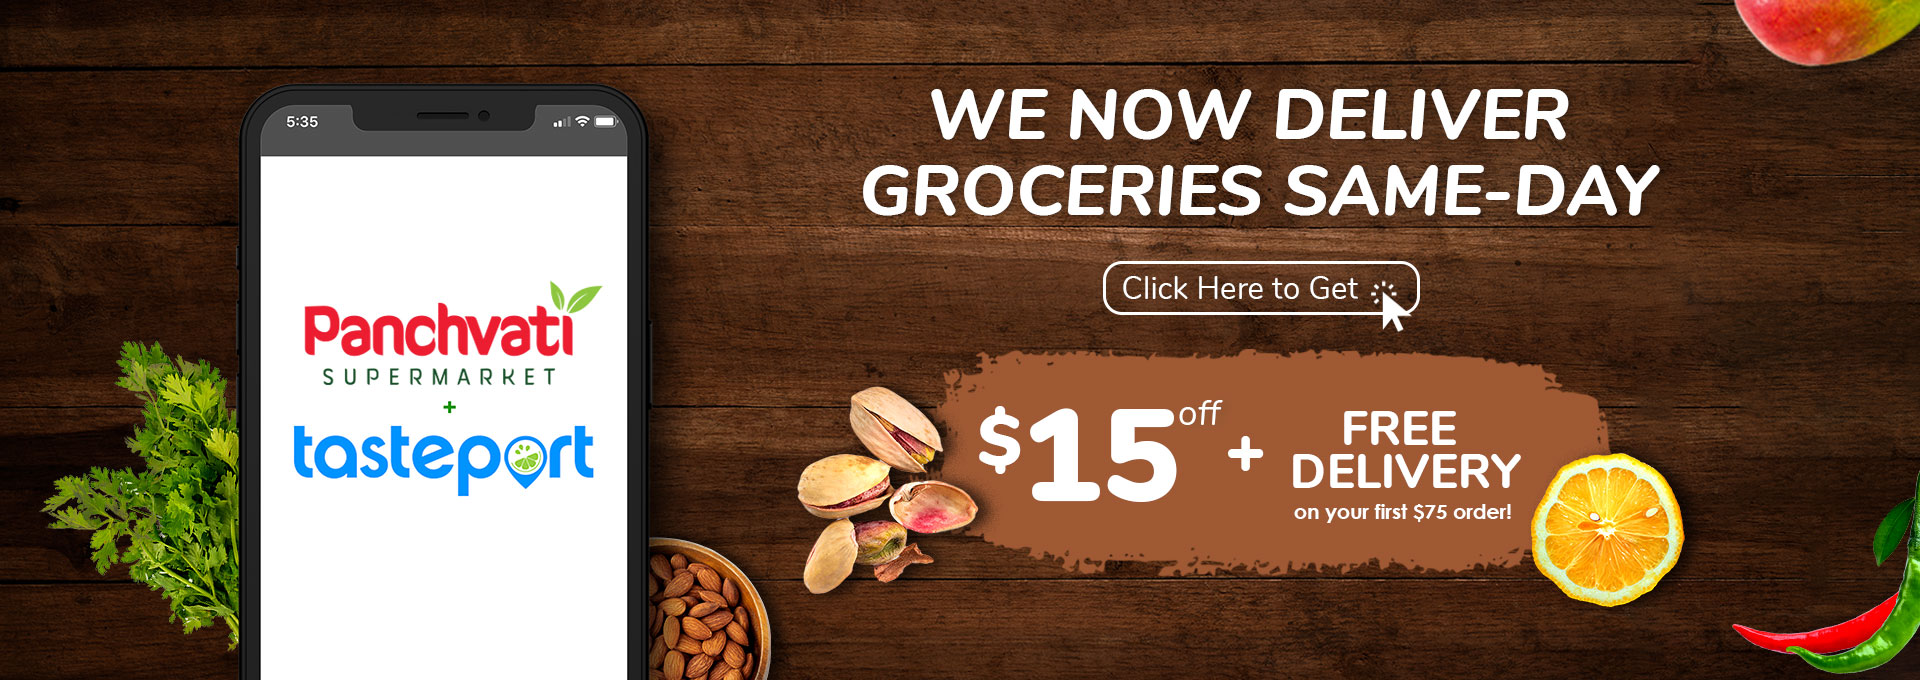 Grocery Delivery in Toronto - Order Online